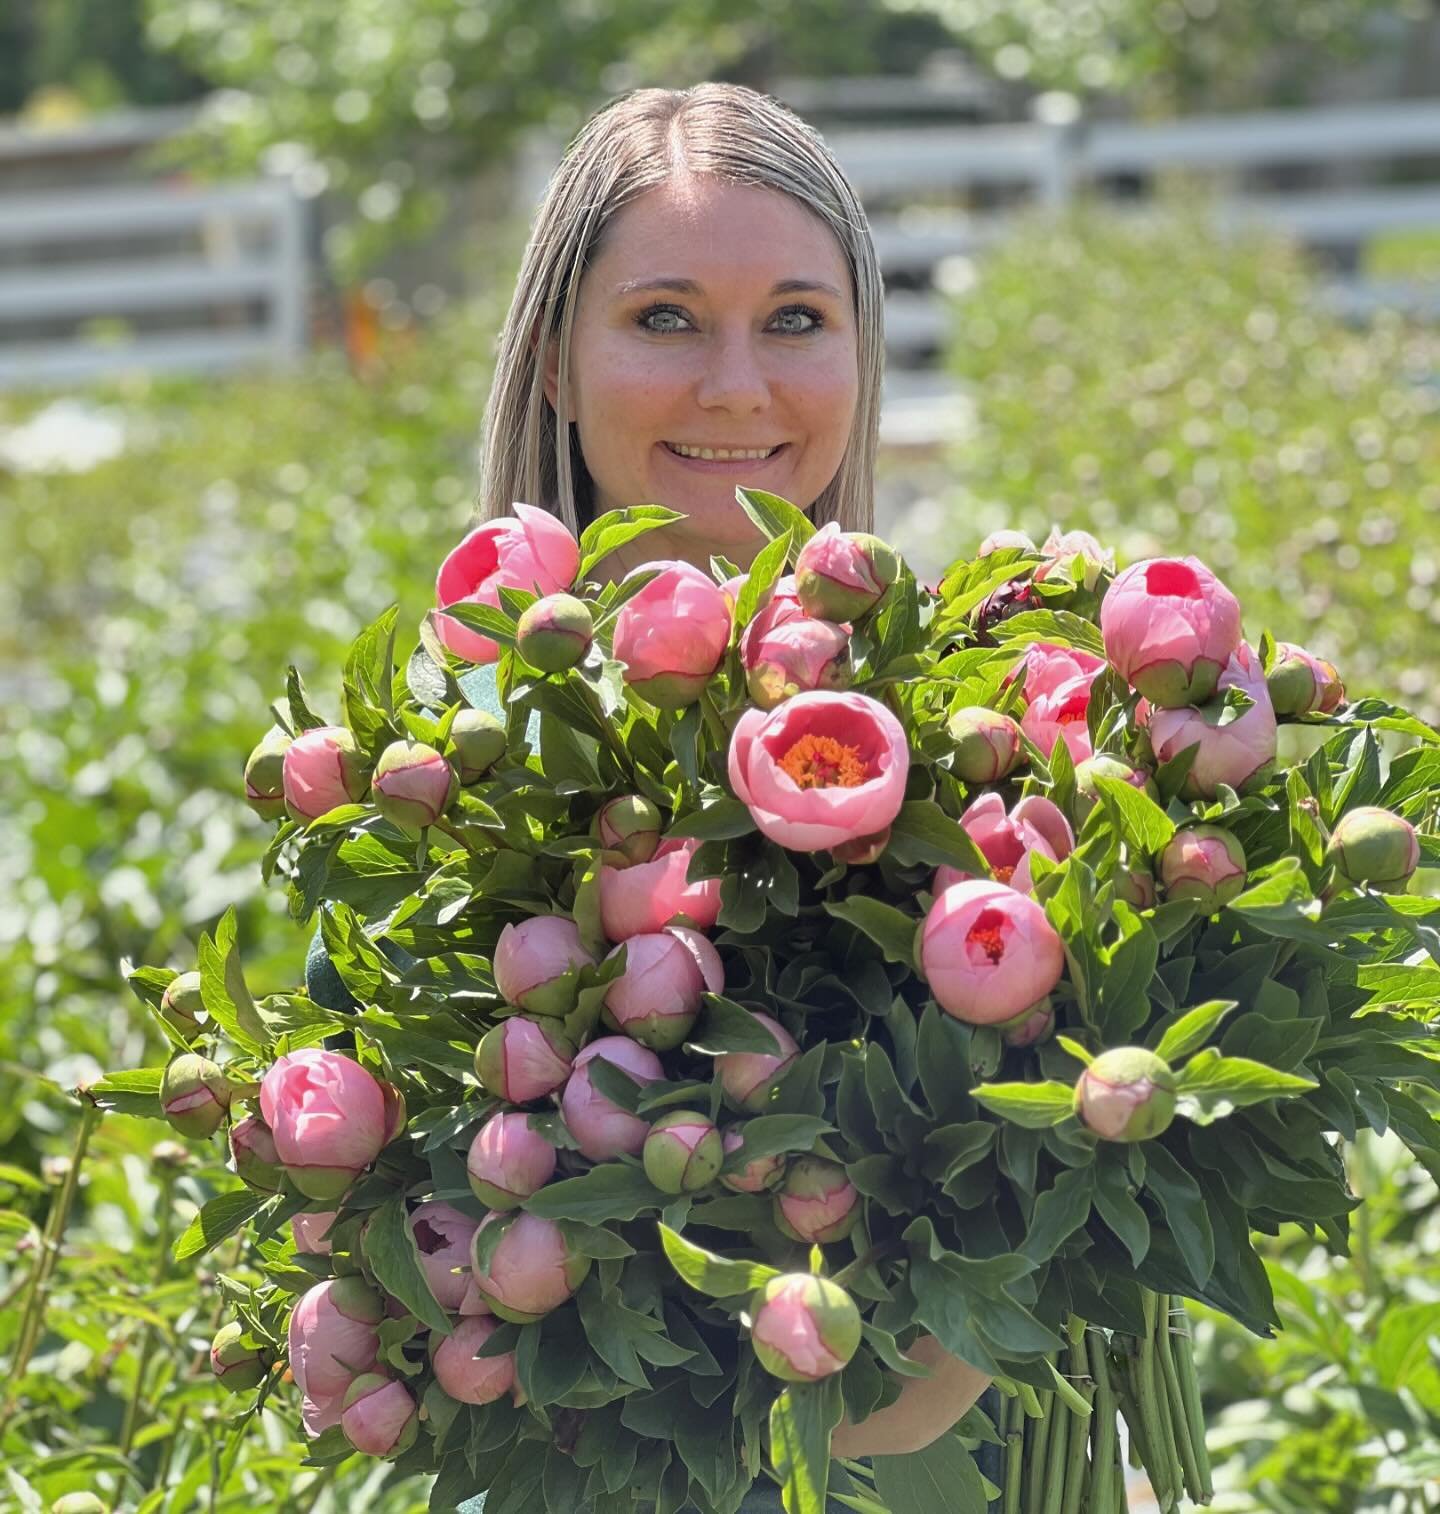 The long awaited peonies are finally here! Everyday we are harvesting more and more and now have some available in The Flower Shed in bouquets and by the stem for you to select your favorite!
So excited to see all of our new varieties bloom! Hope you